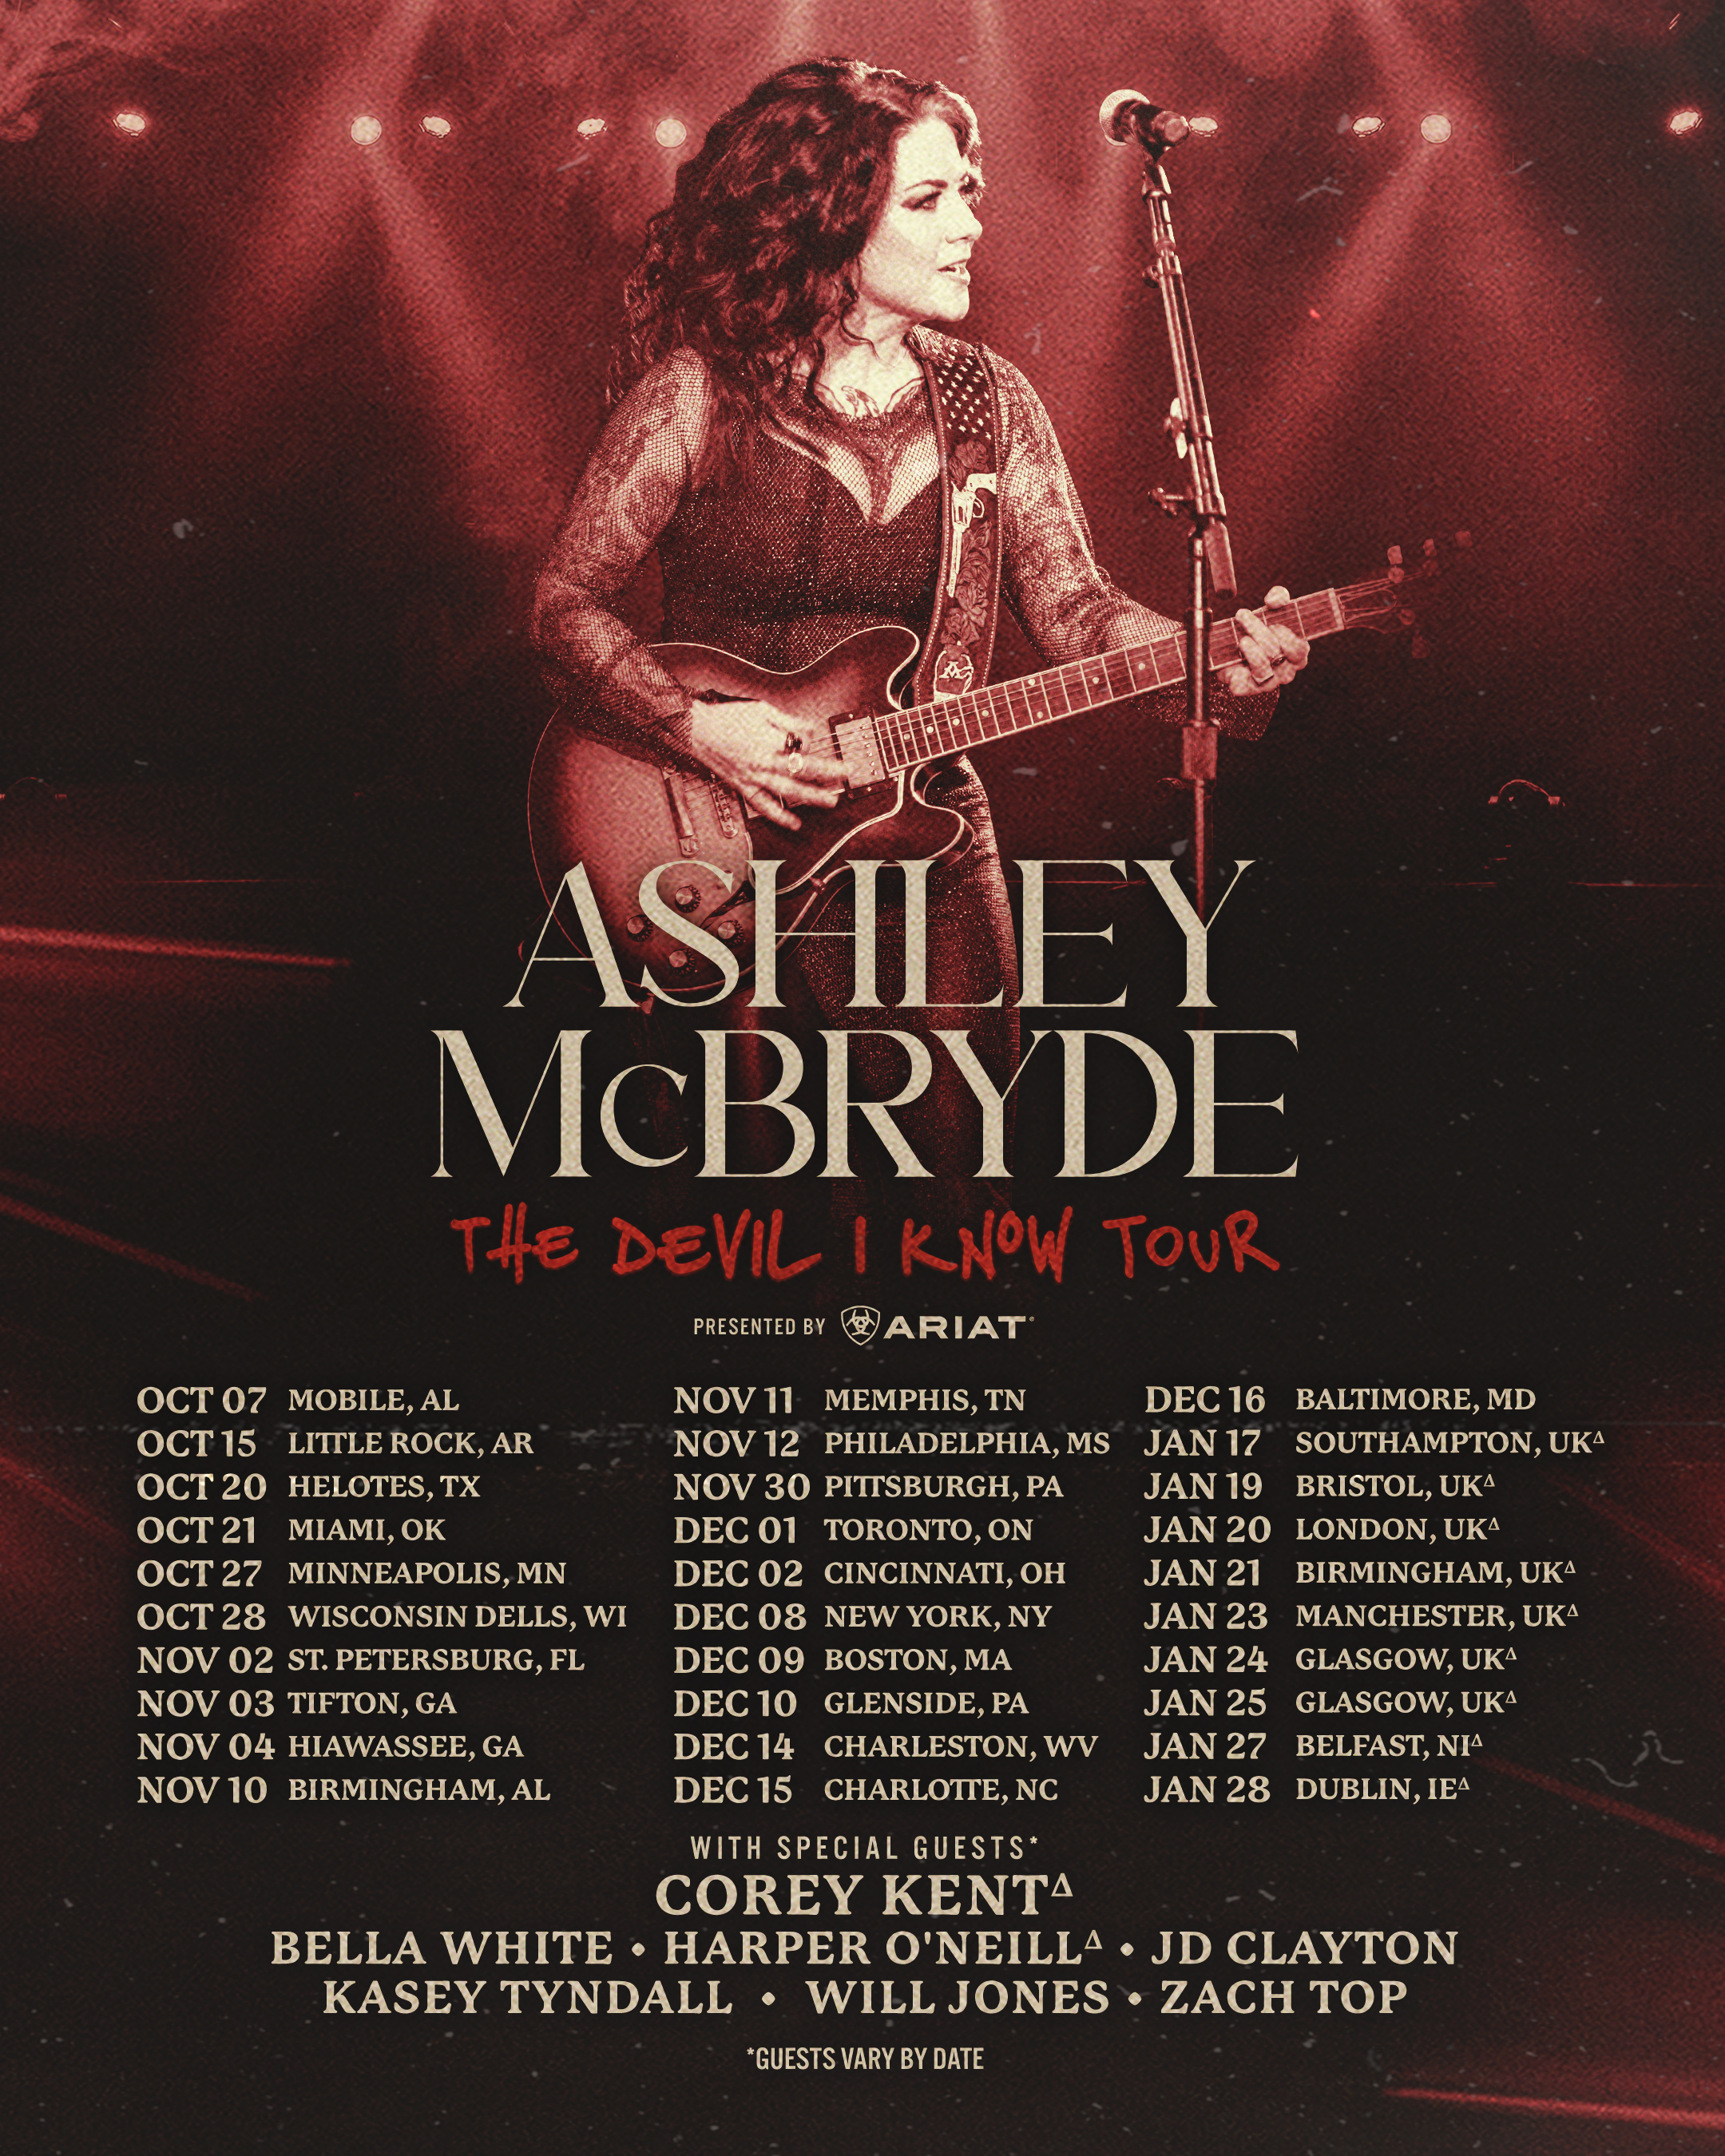 ASHLEY McBRYDE ANNOUNCES THE DEVIL I KNOW TOUR PRESENTED BY ARIAT